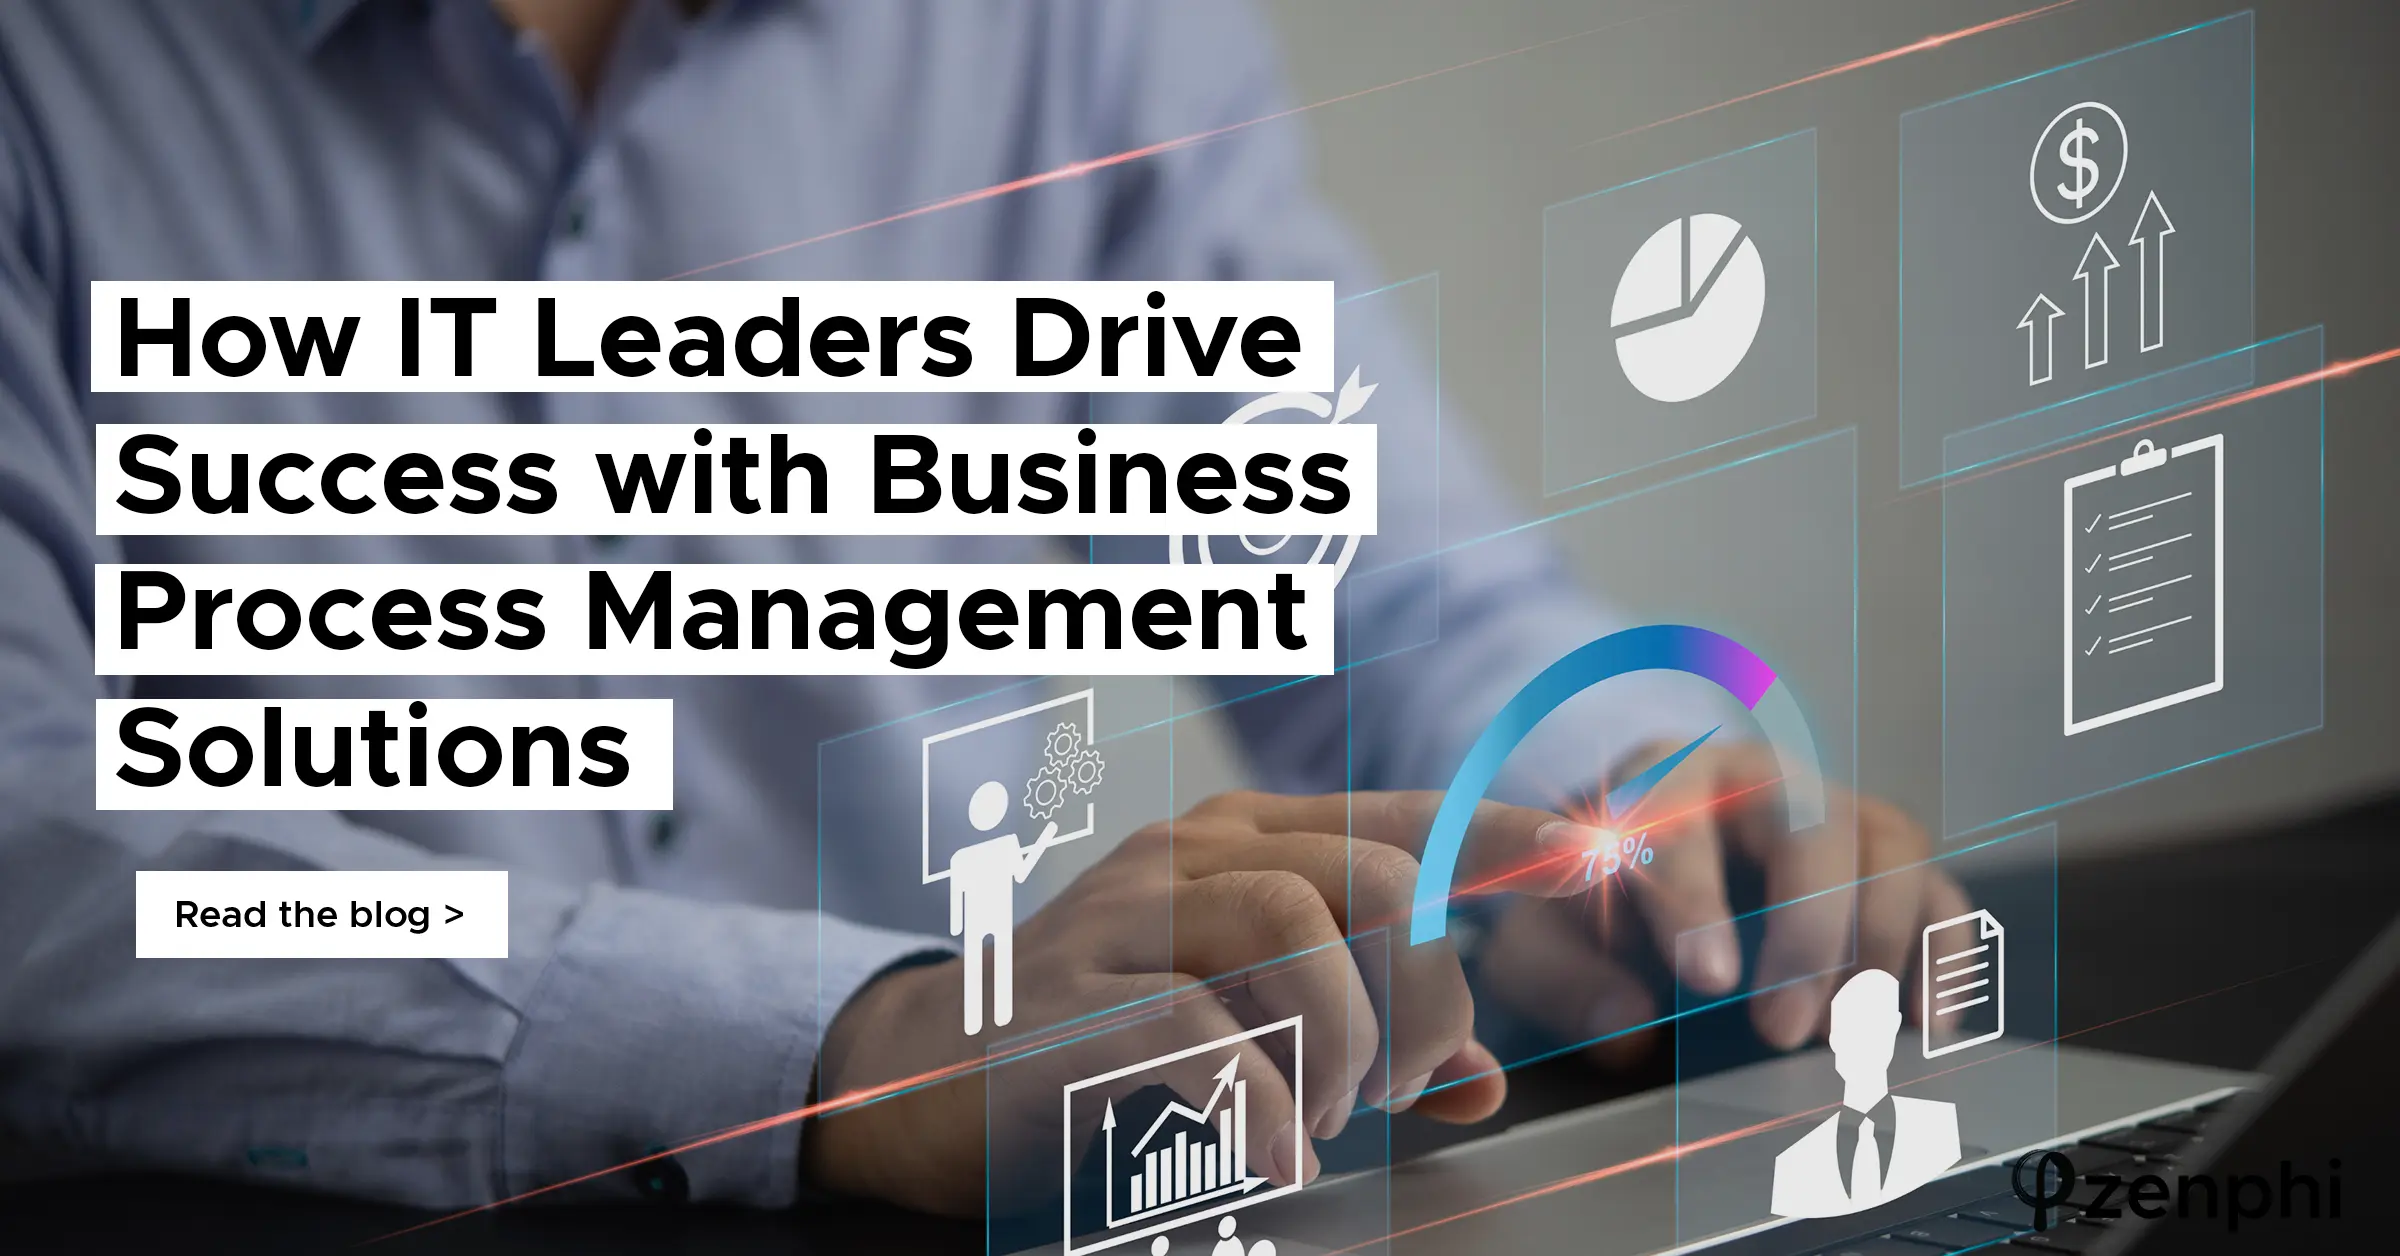 How IT Leaders Drive Success with Business Process Management Solutions